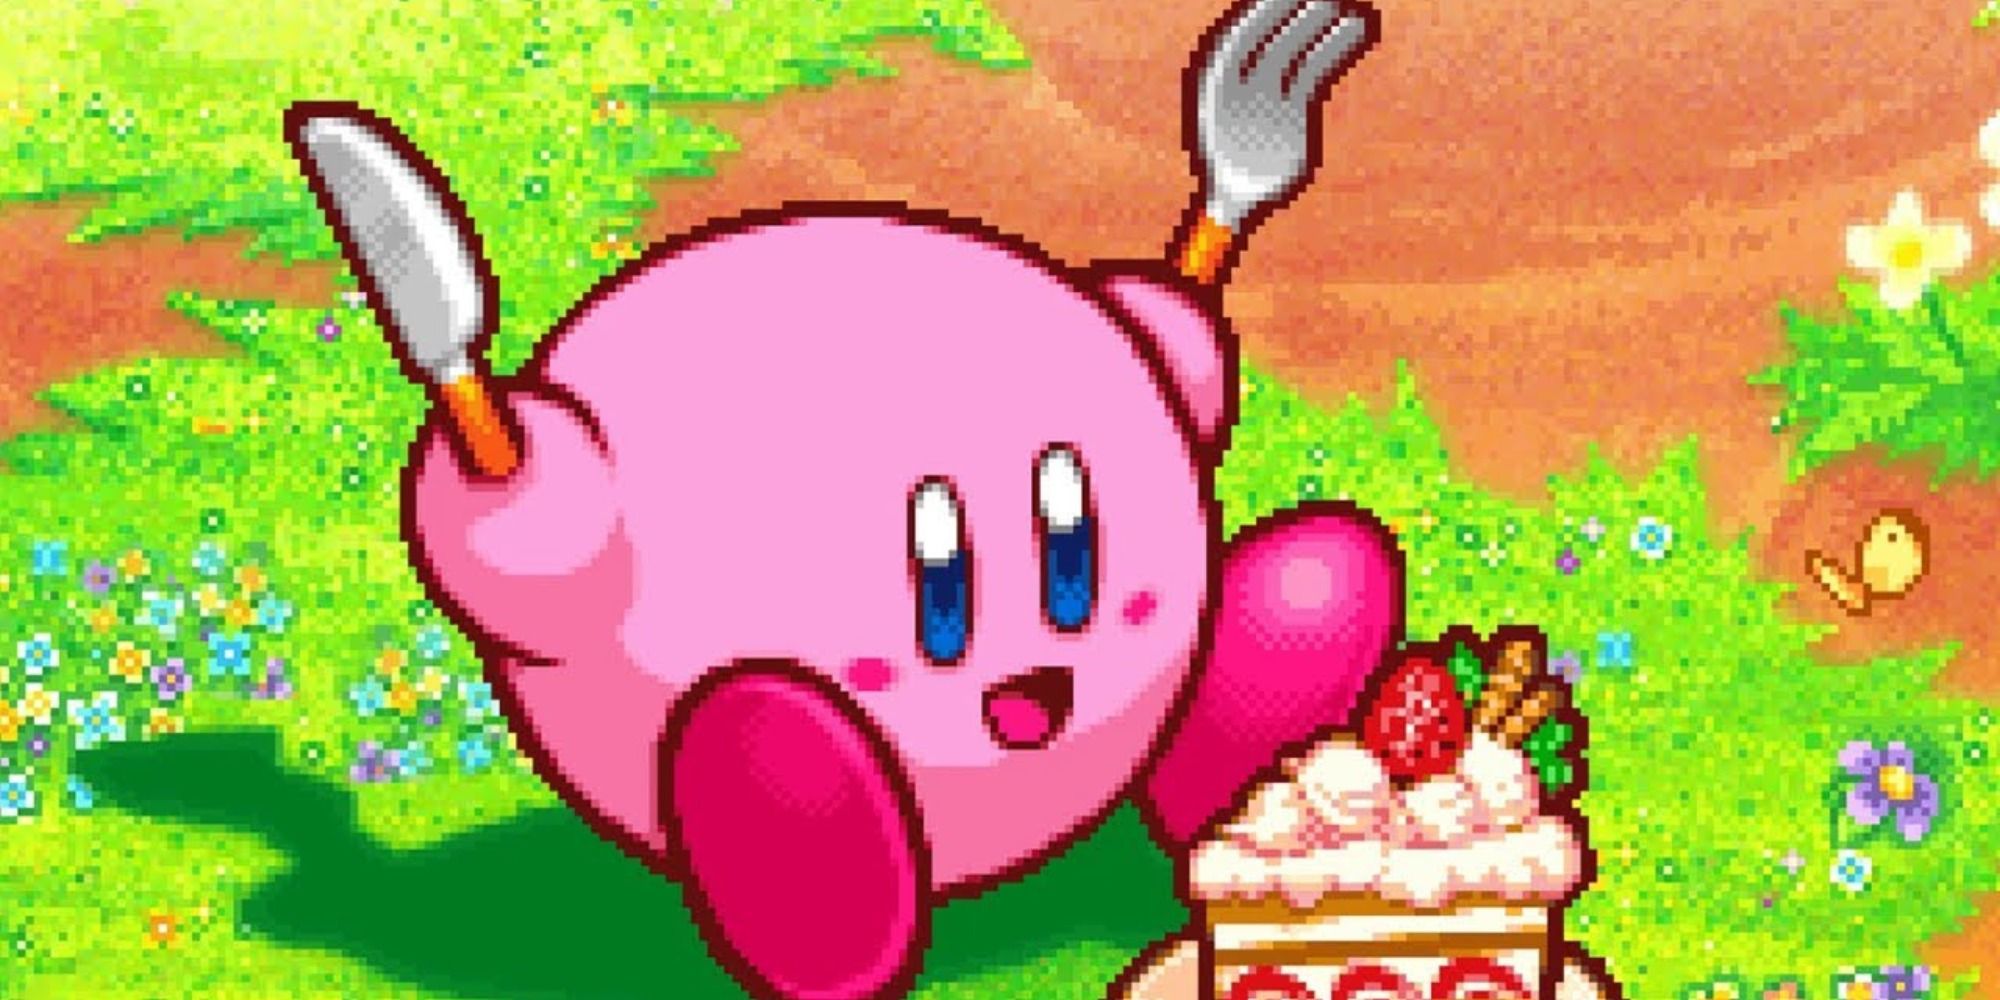 A screenshot of Kirby Squeak Squad, showing Kirby ready to dig into a slice of strawberry shortcake